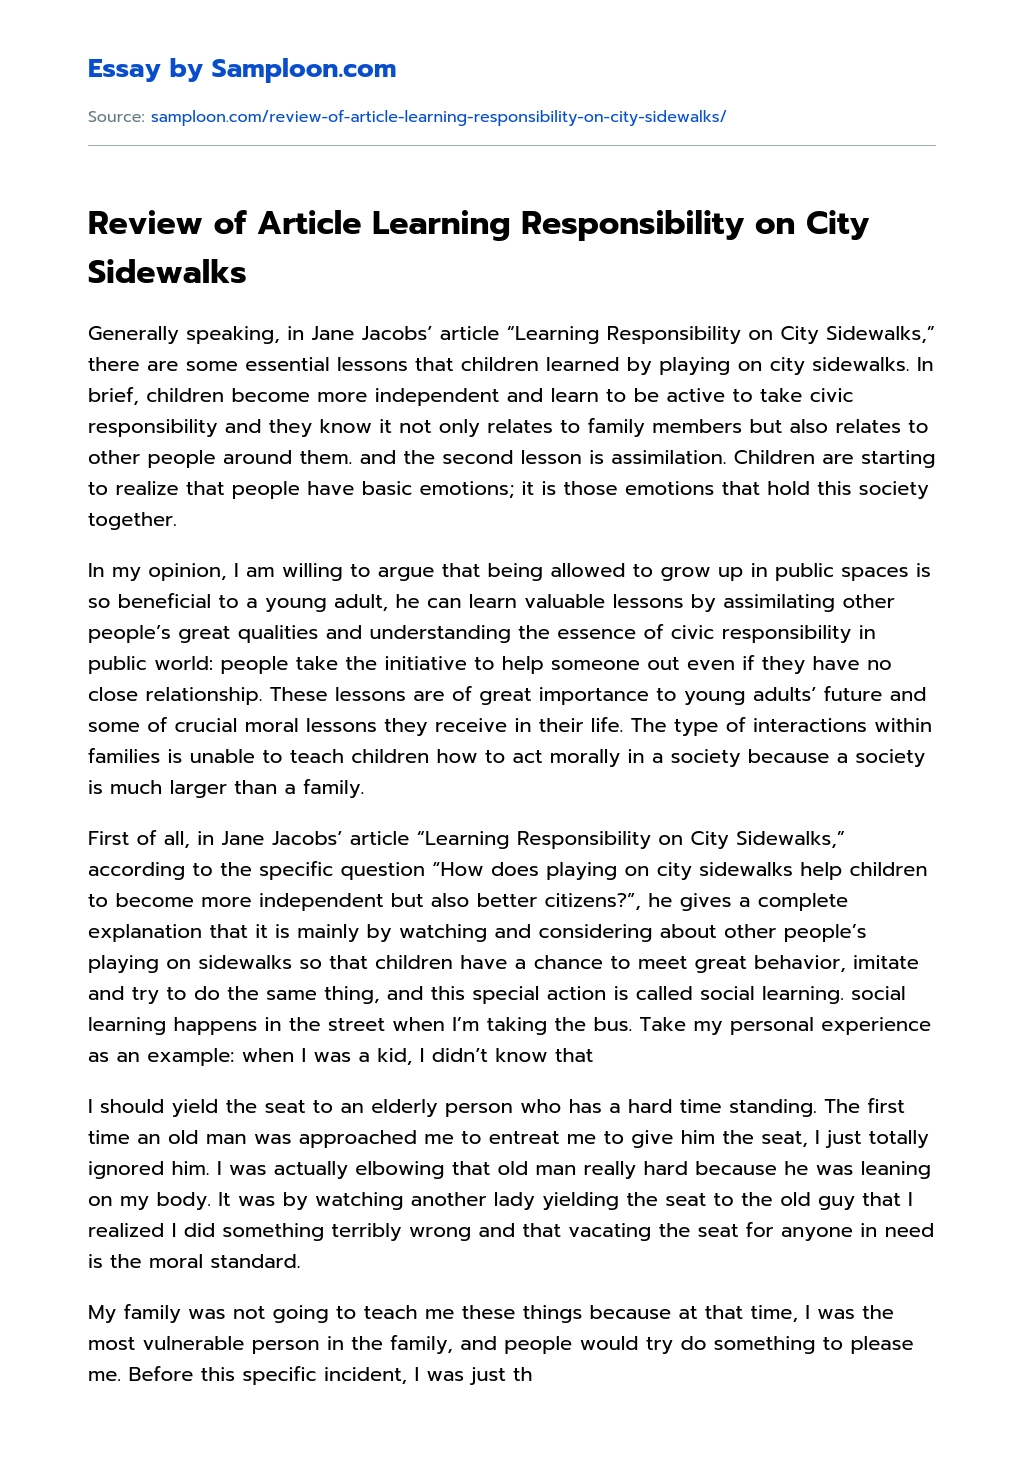 Review of Article Learning Responsibility on City Sidewalks essay